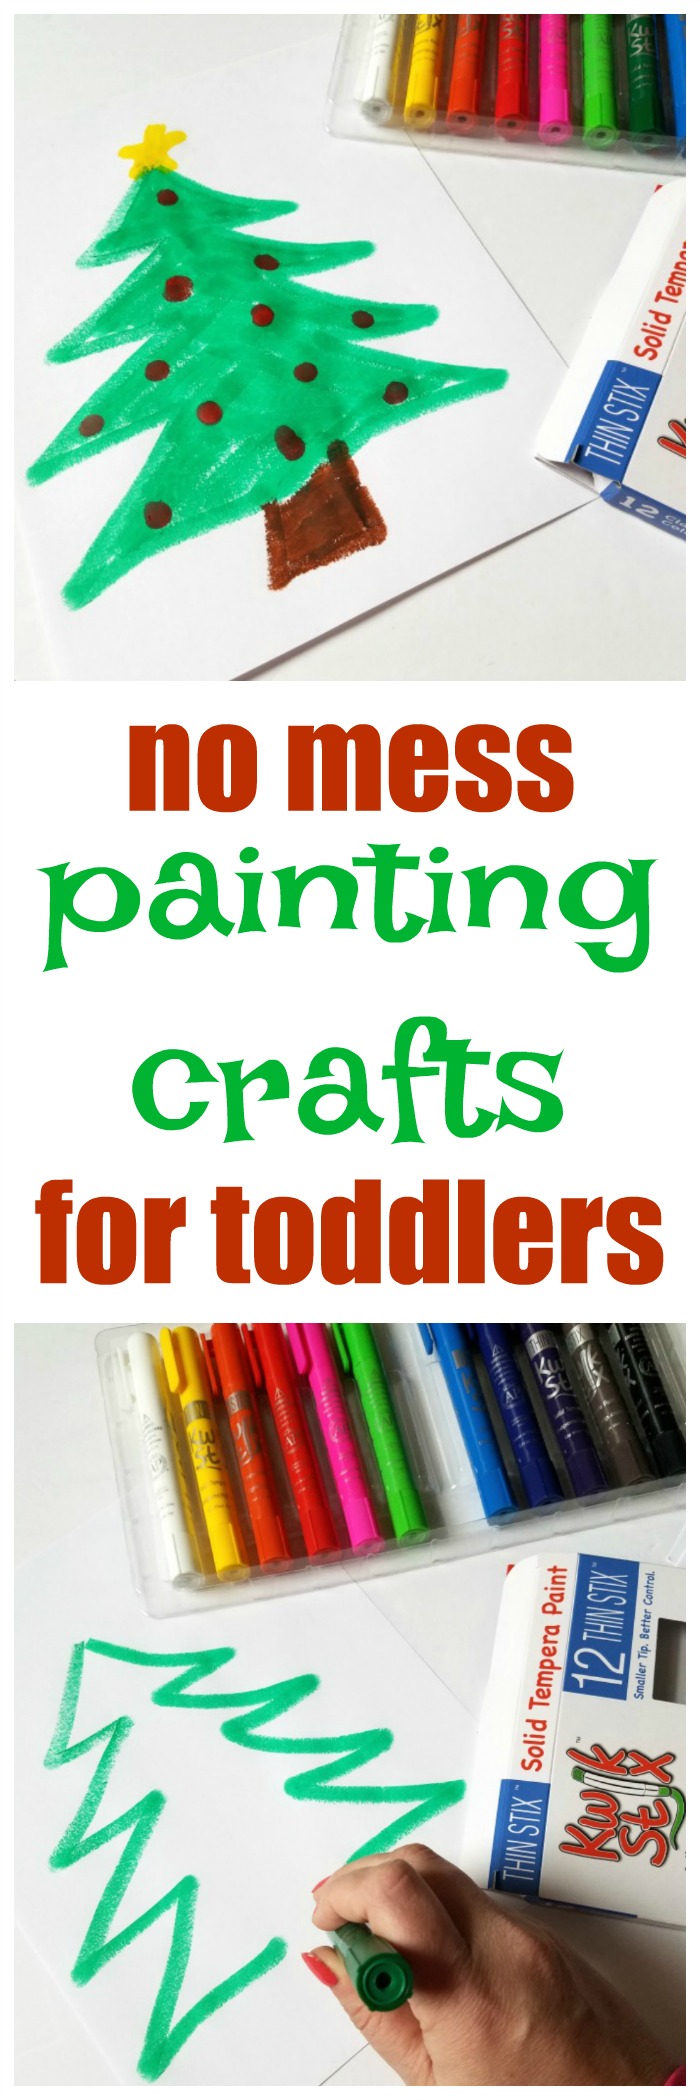 no mess painting crafts for toddlers